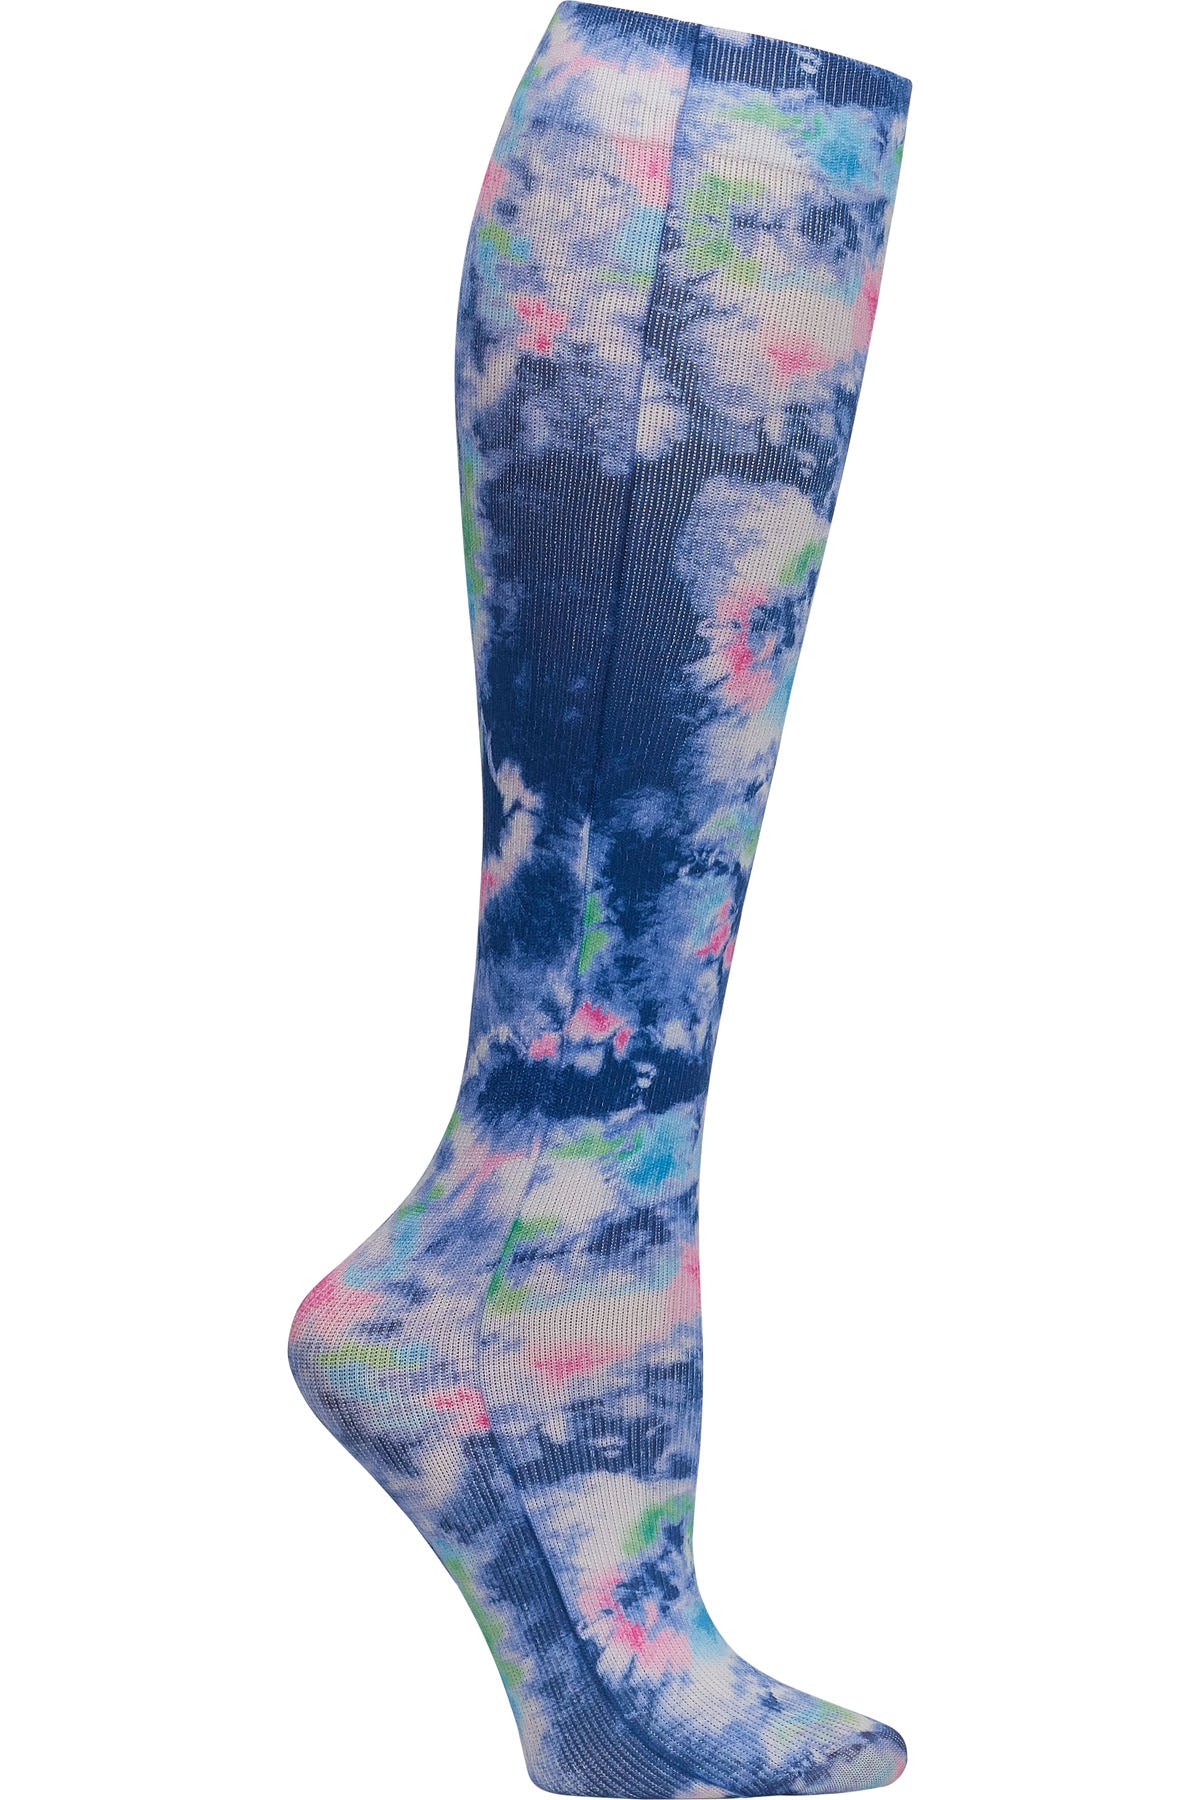 Celeste Stein Mild Compression Socks 8-15 mmHG Bright Tie Dye at Parker's Clothing and Shoes.